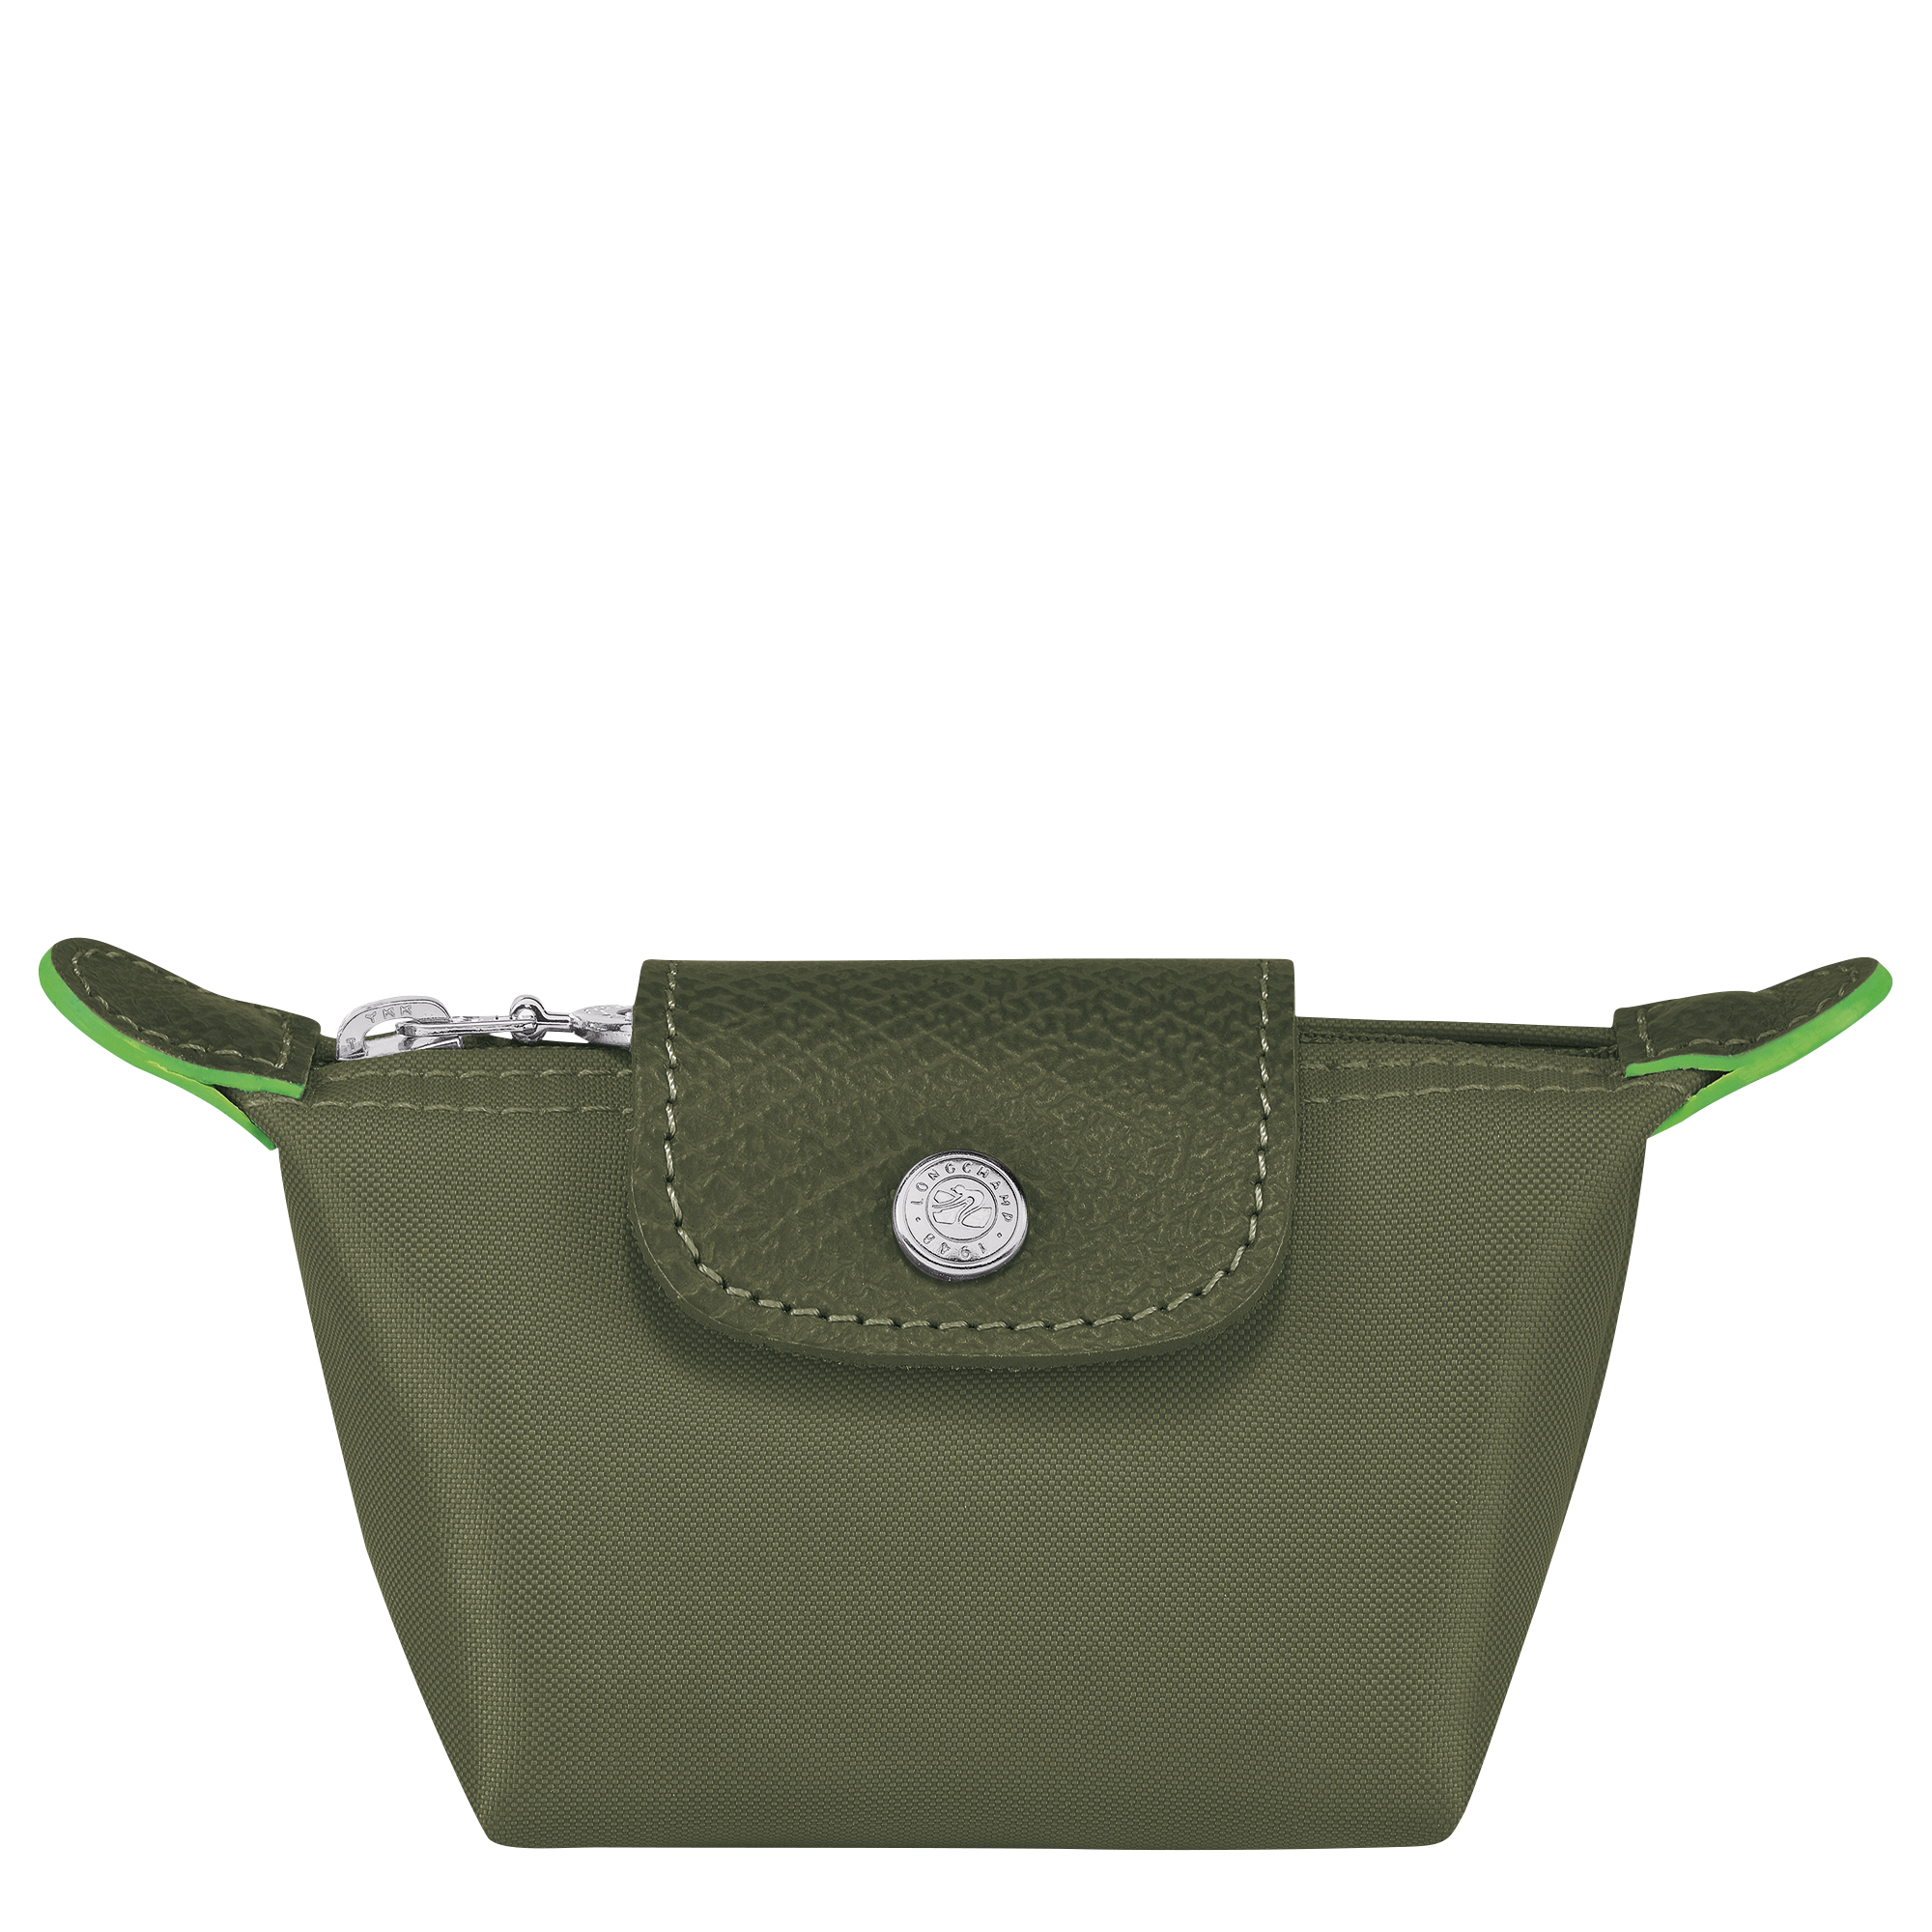 Le Pliage Green Coin purse, Forest